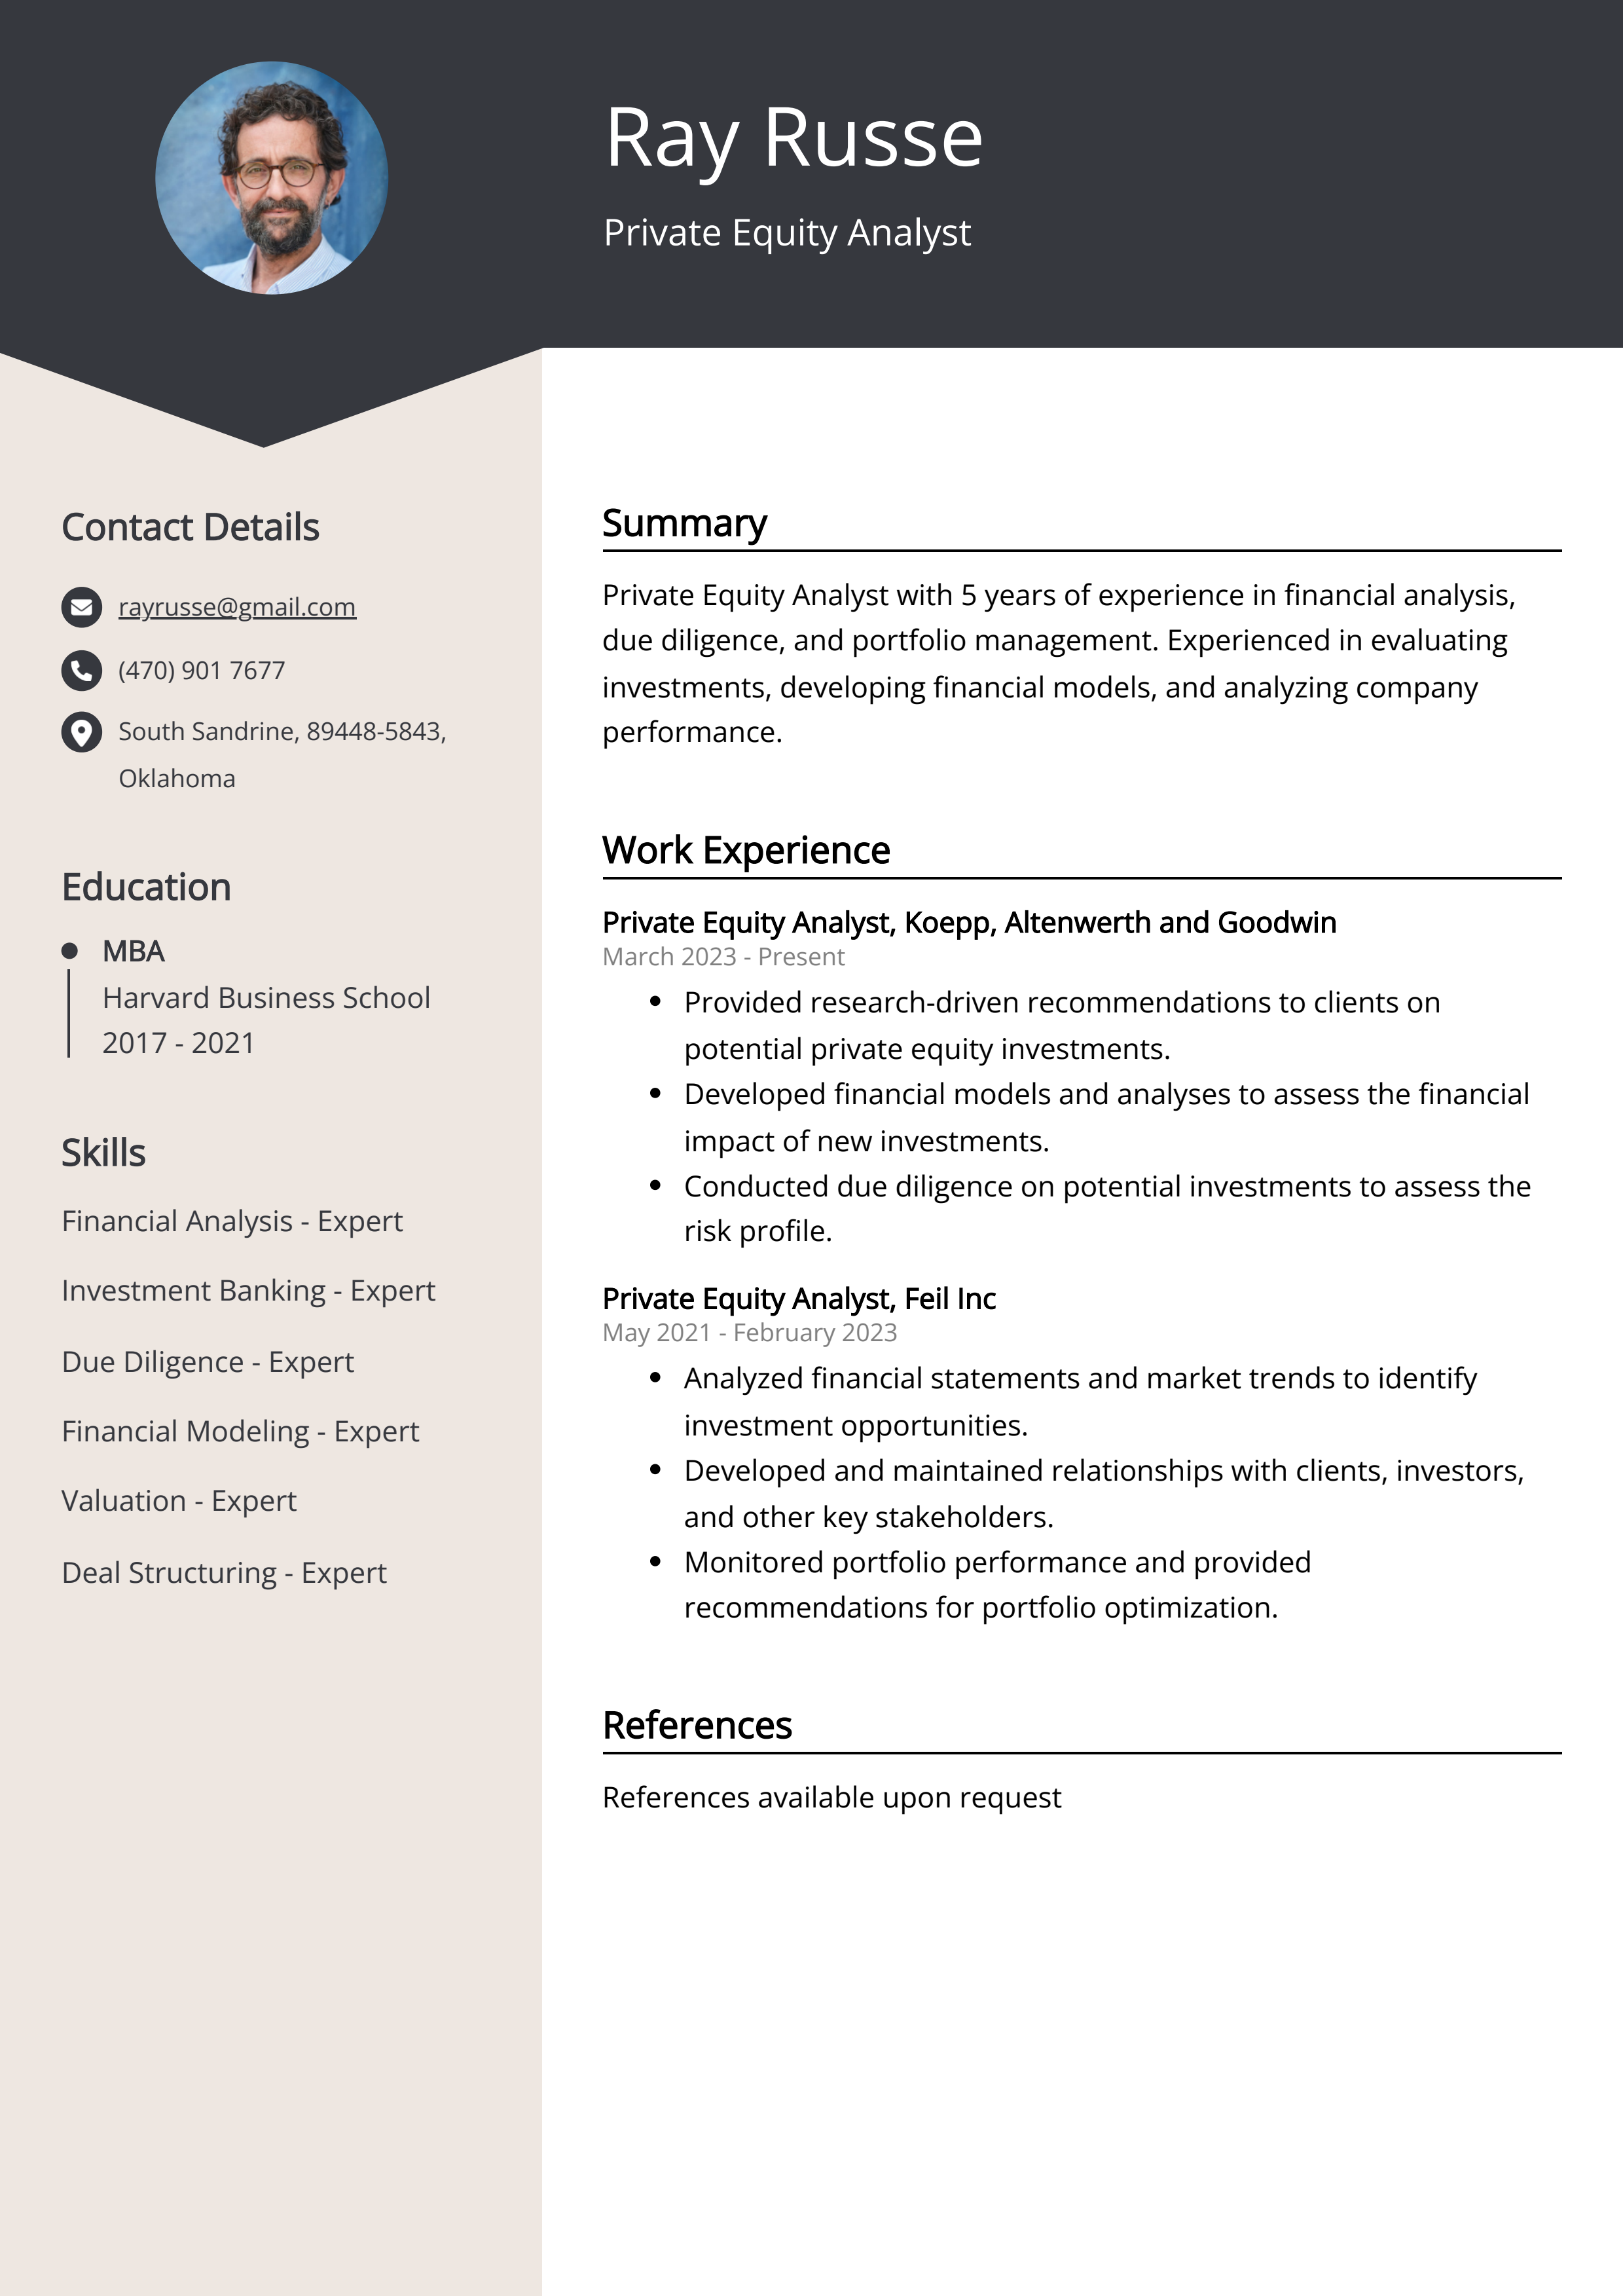 Private Equity Analyst CV Example